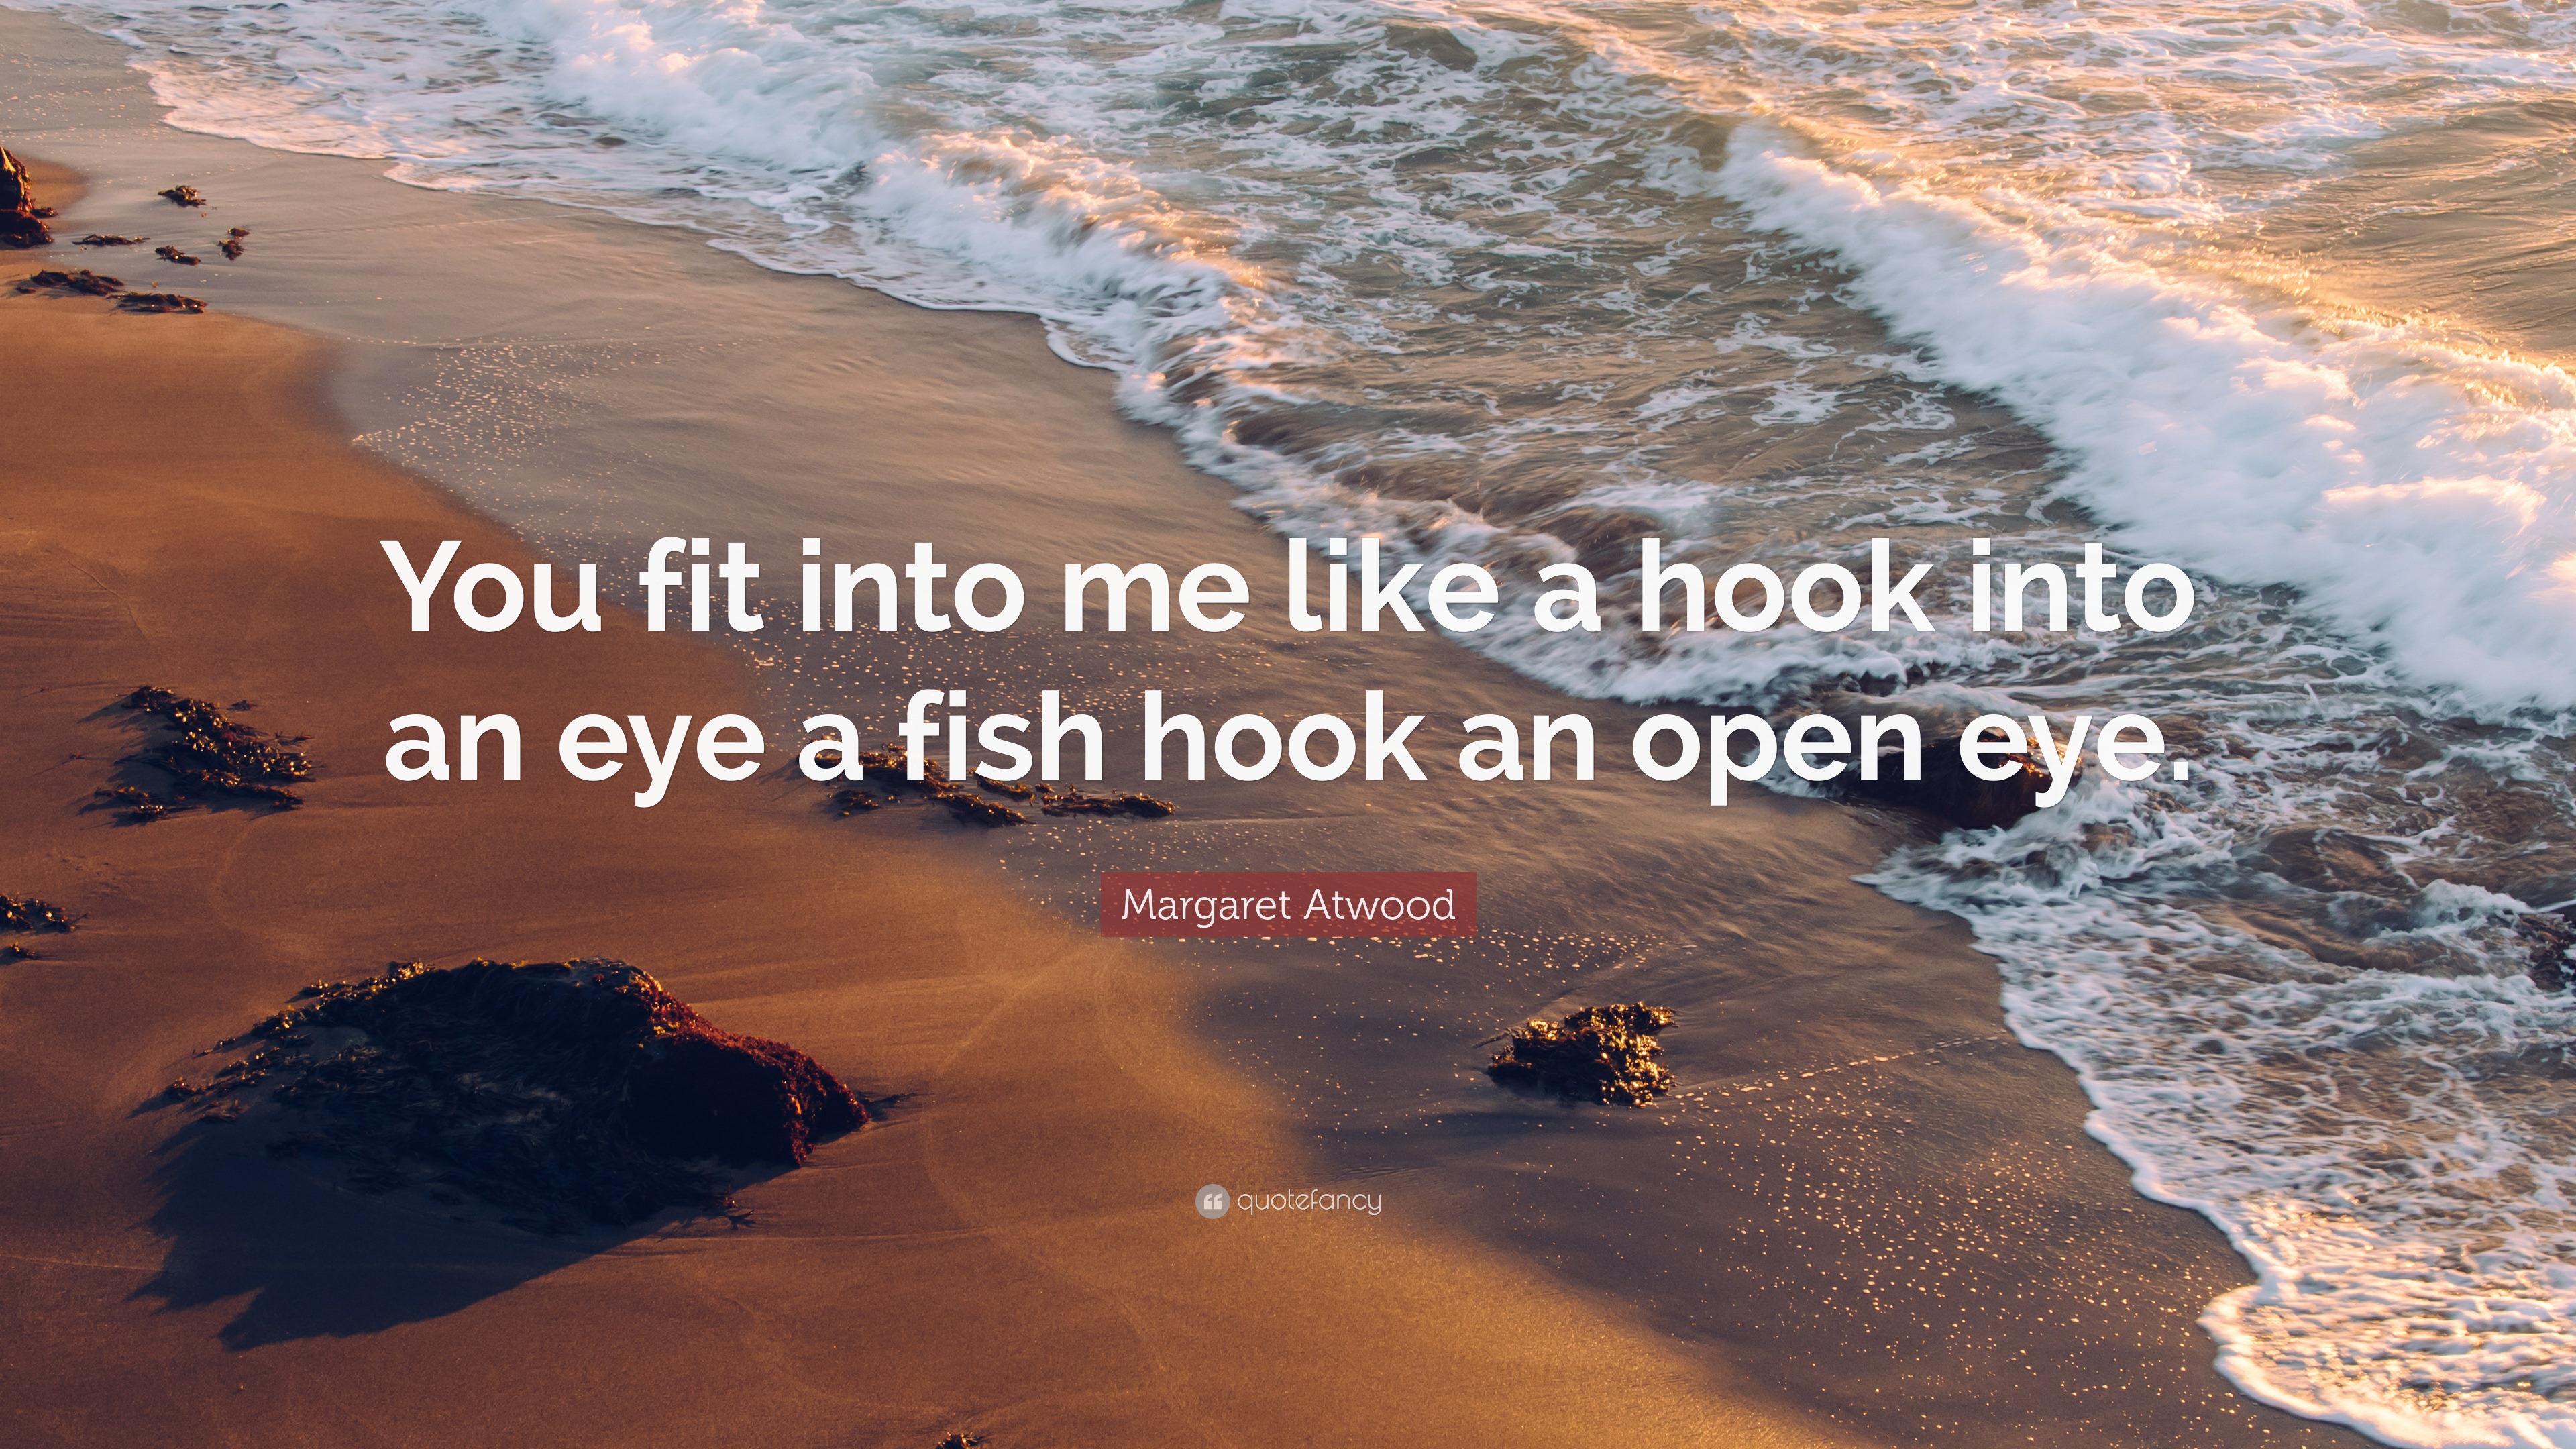 Margaret Atwood Quote: “You fit into me like a hook into an eye a fish hook